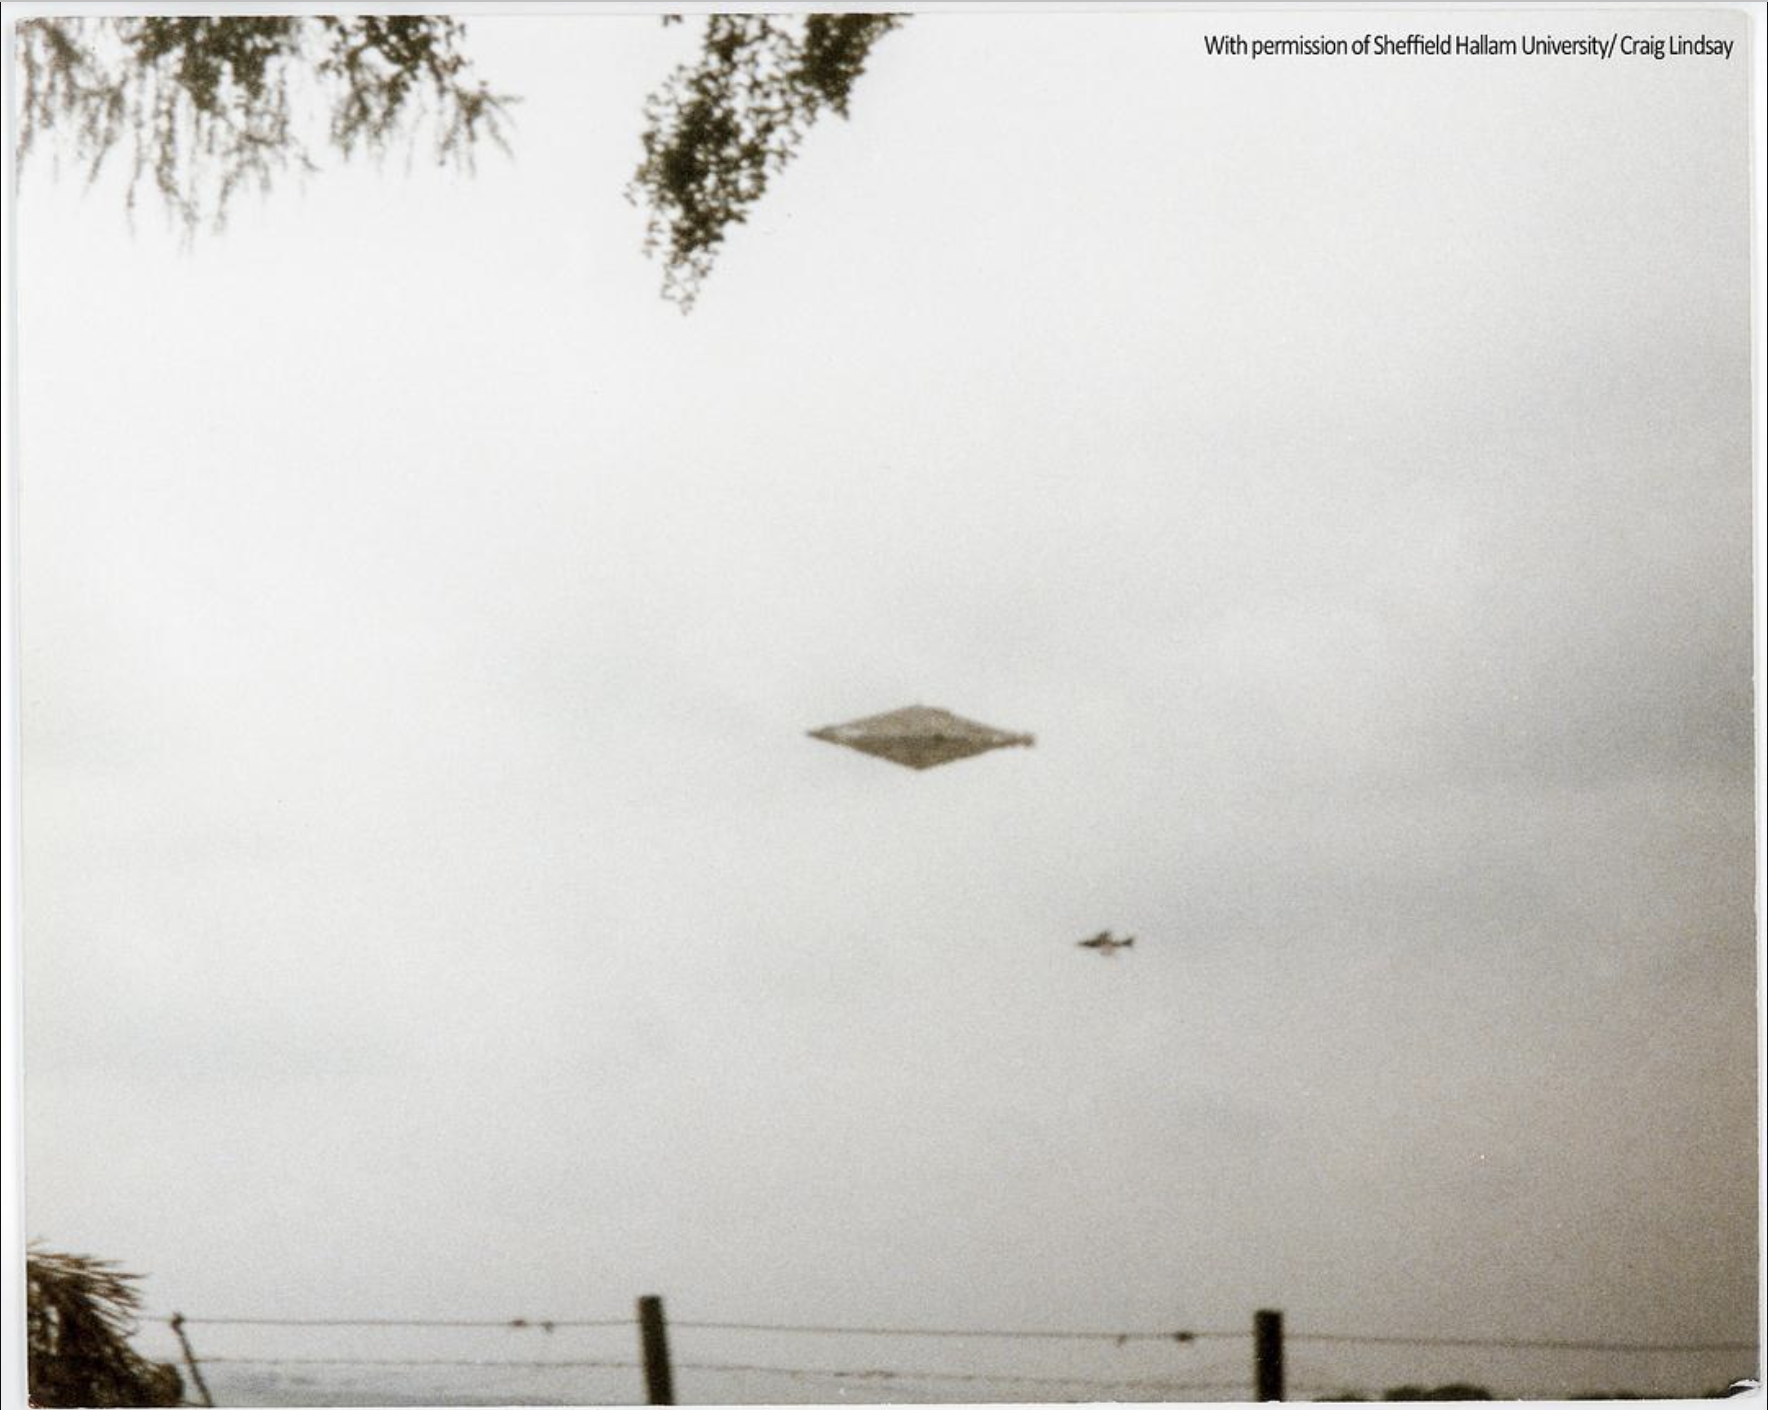 One of the Calvine UFO photographs clearly showing a diamond-shaped craft, and an airplane in the distance. Image Credit: Sheffield Hallam University/Craig Lindsay.